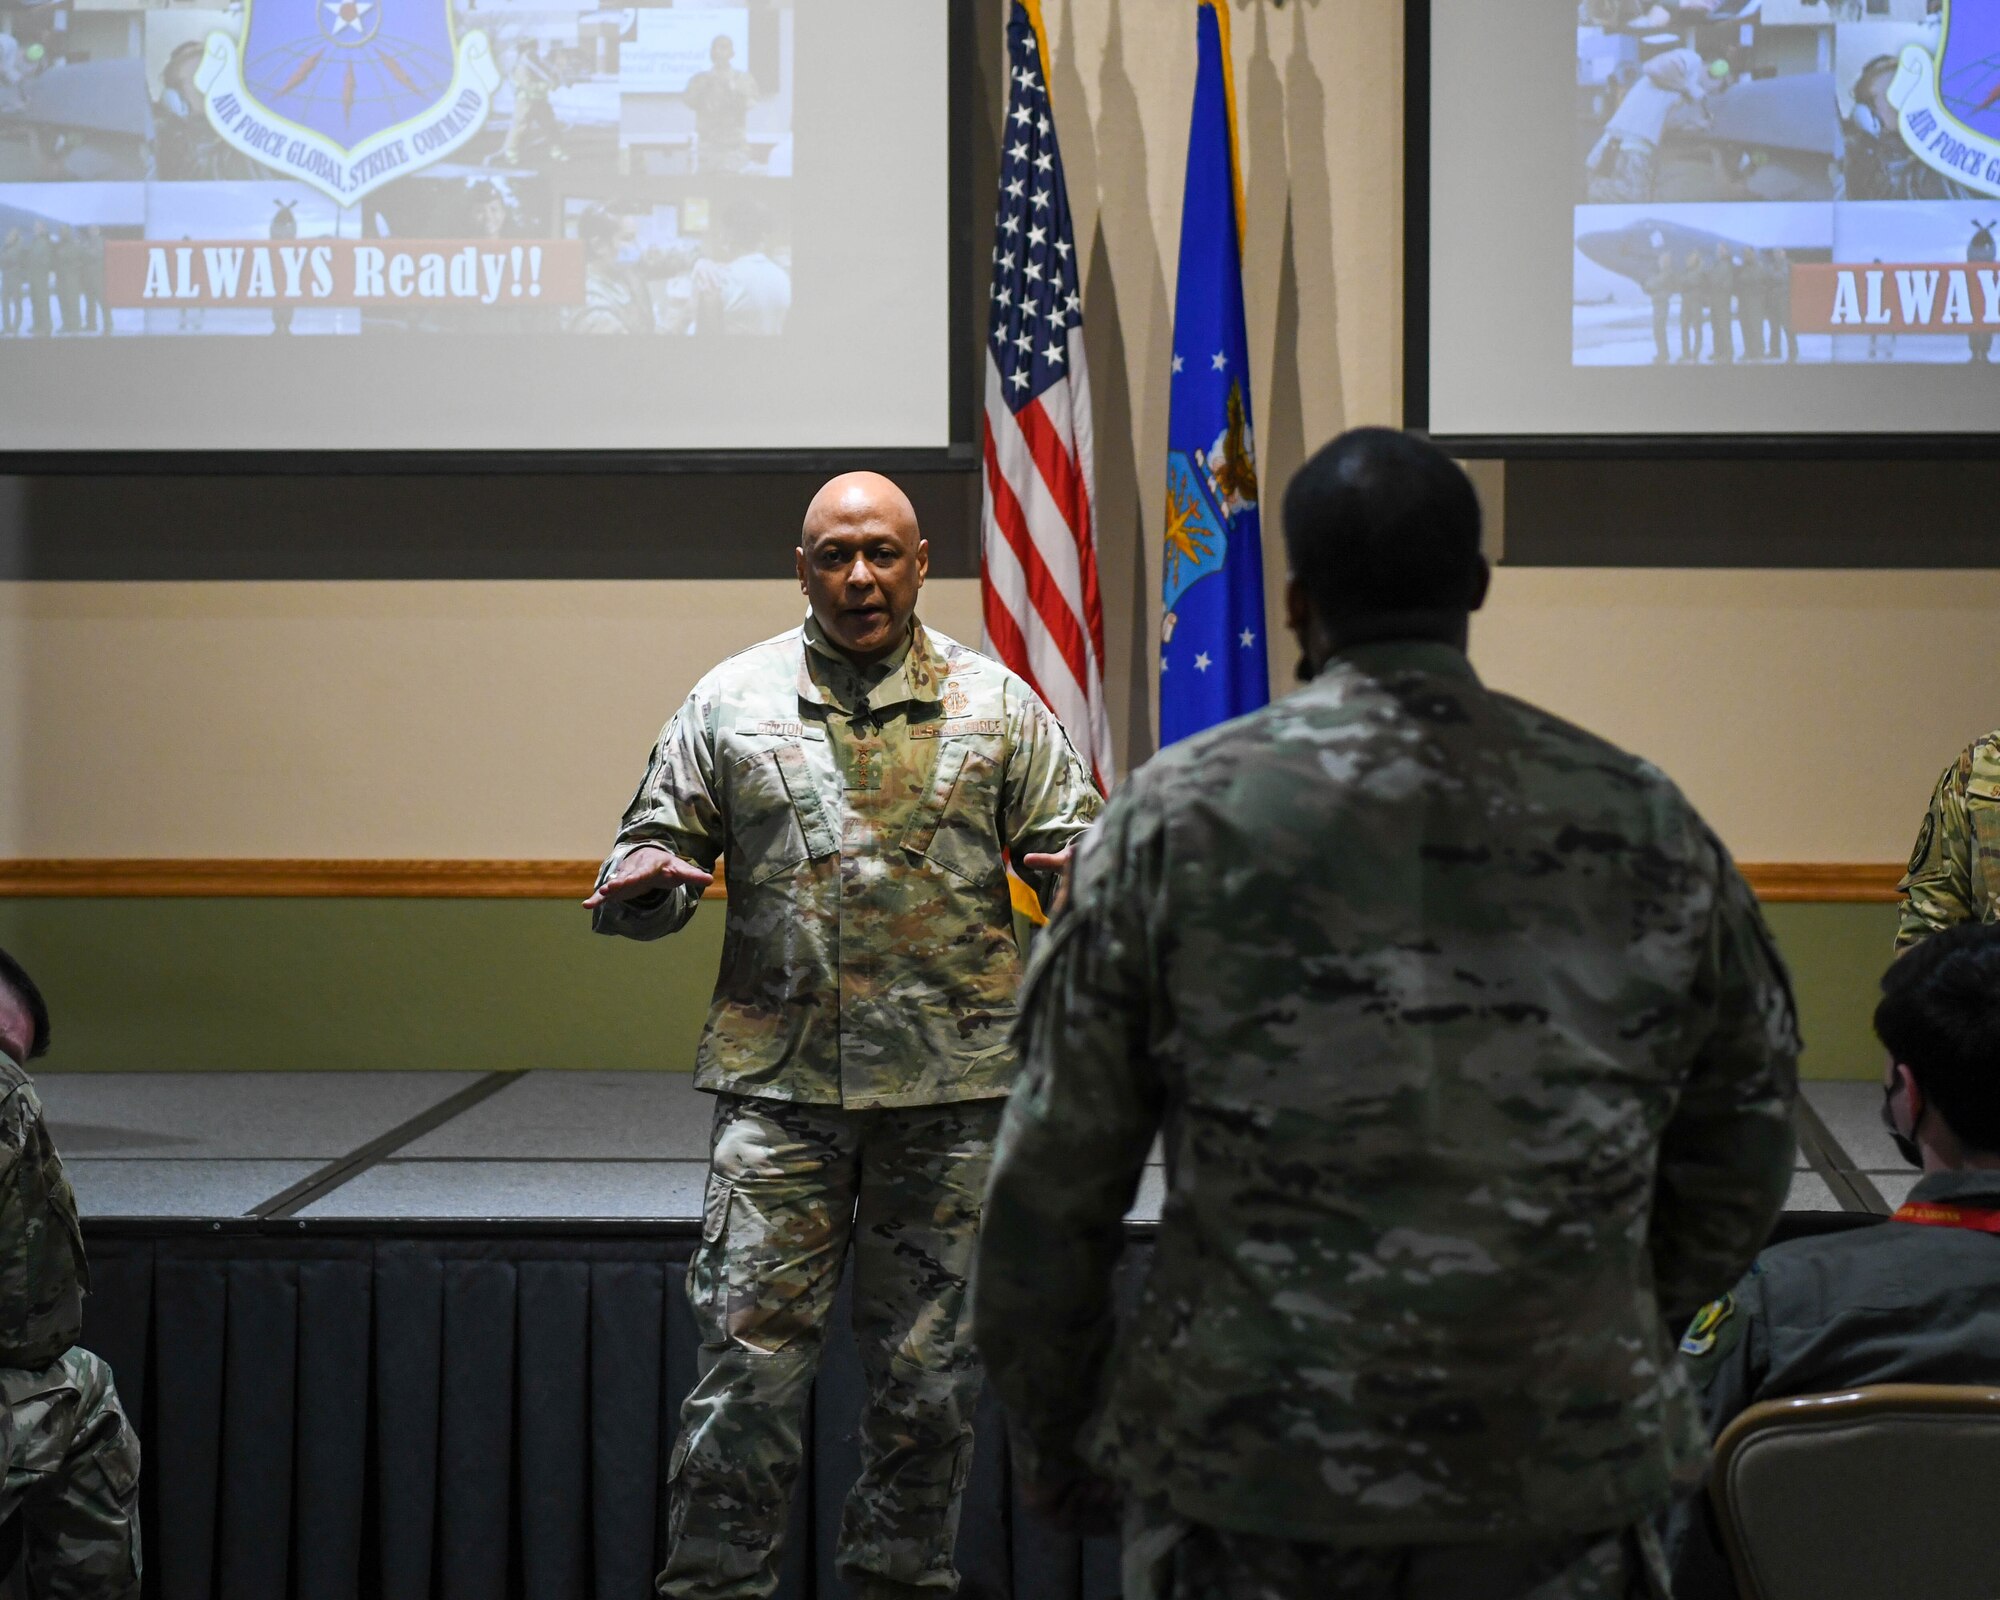 Gen. Anthony Cotton, Air Force Global Strike Command commander, answers a question from Tech. Sgt. Christopher Moore 91st Security Forces Group defender, at an all call at Minot Air Force Base, North Dakota, Feb 23, 2022. While visiting Minot Air Force Base, Gen. Cotton conversed with airmen and leaders about their experiences protecting, interacting and maintaining assets in order to make informed integrated decisions for modernization programs. (U.S. Air Force photo by Airman 1st Class Evan Lichtenhan